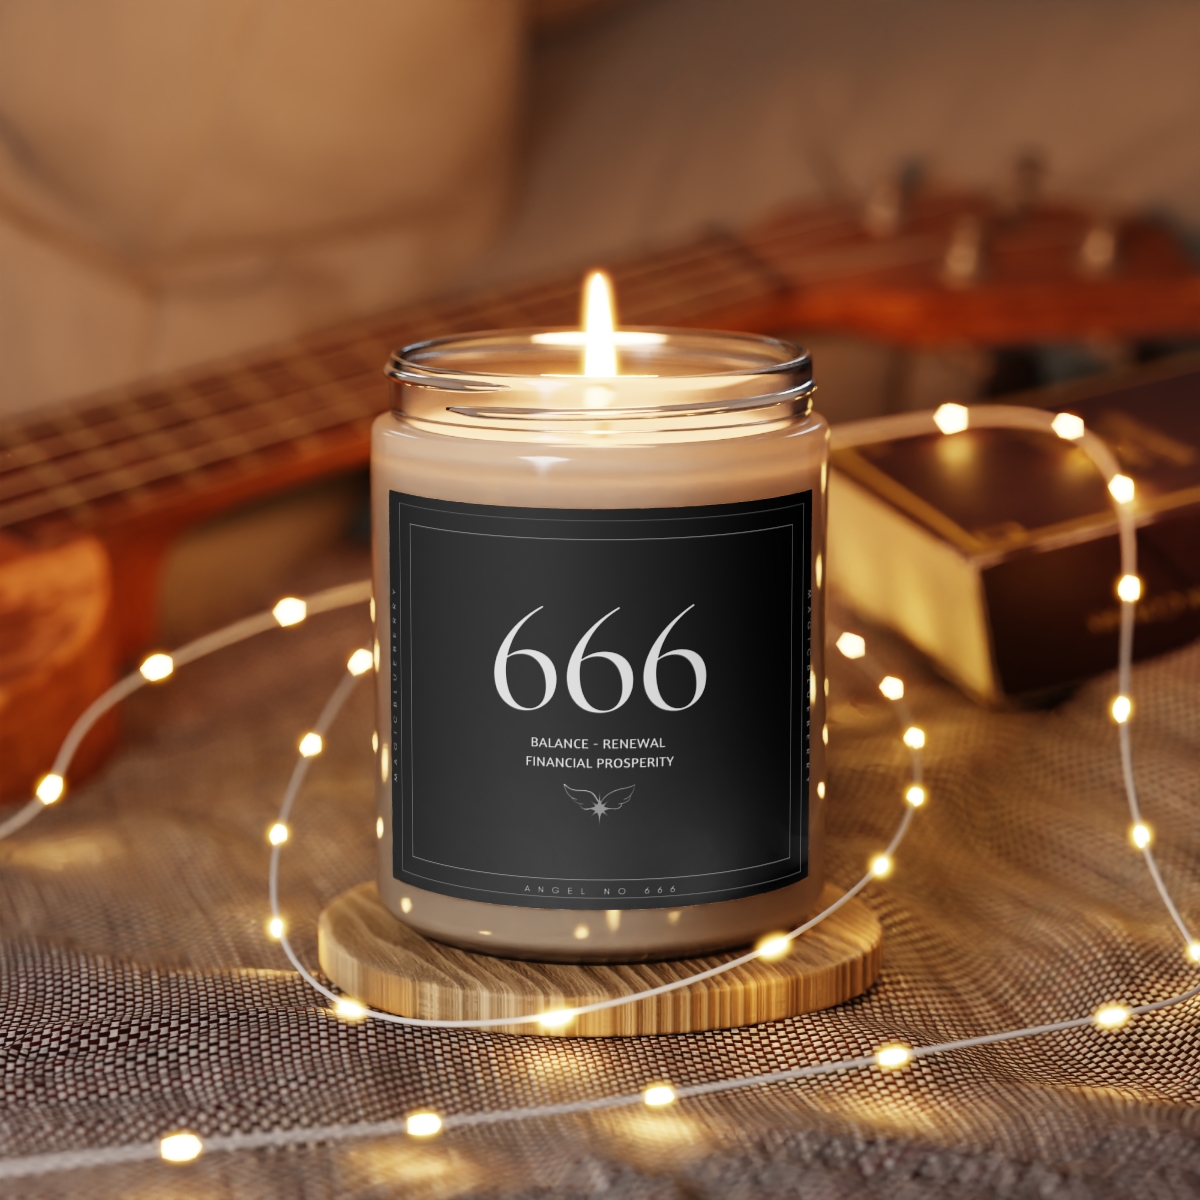 Angel Spell 666 - Scented Vegan Soy Wax Candles, Clear Jar Candle, Spell Candles, Sassy Candle, Vegan Candle, Cotton Wick Candle product main image